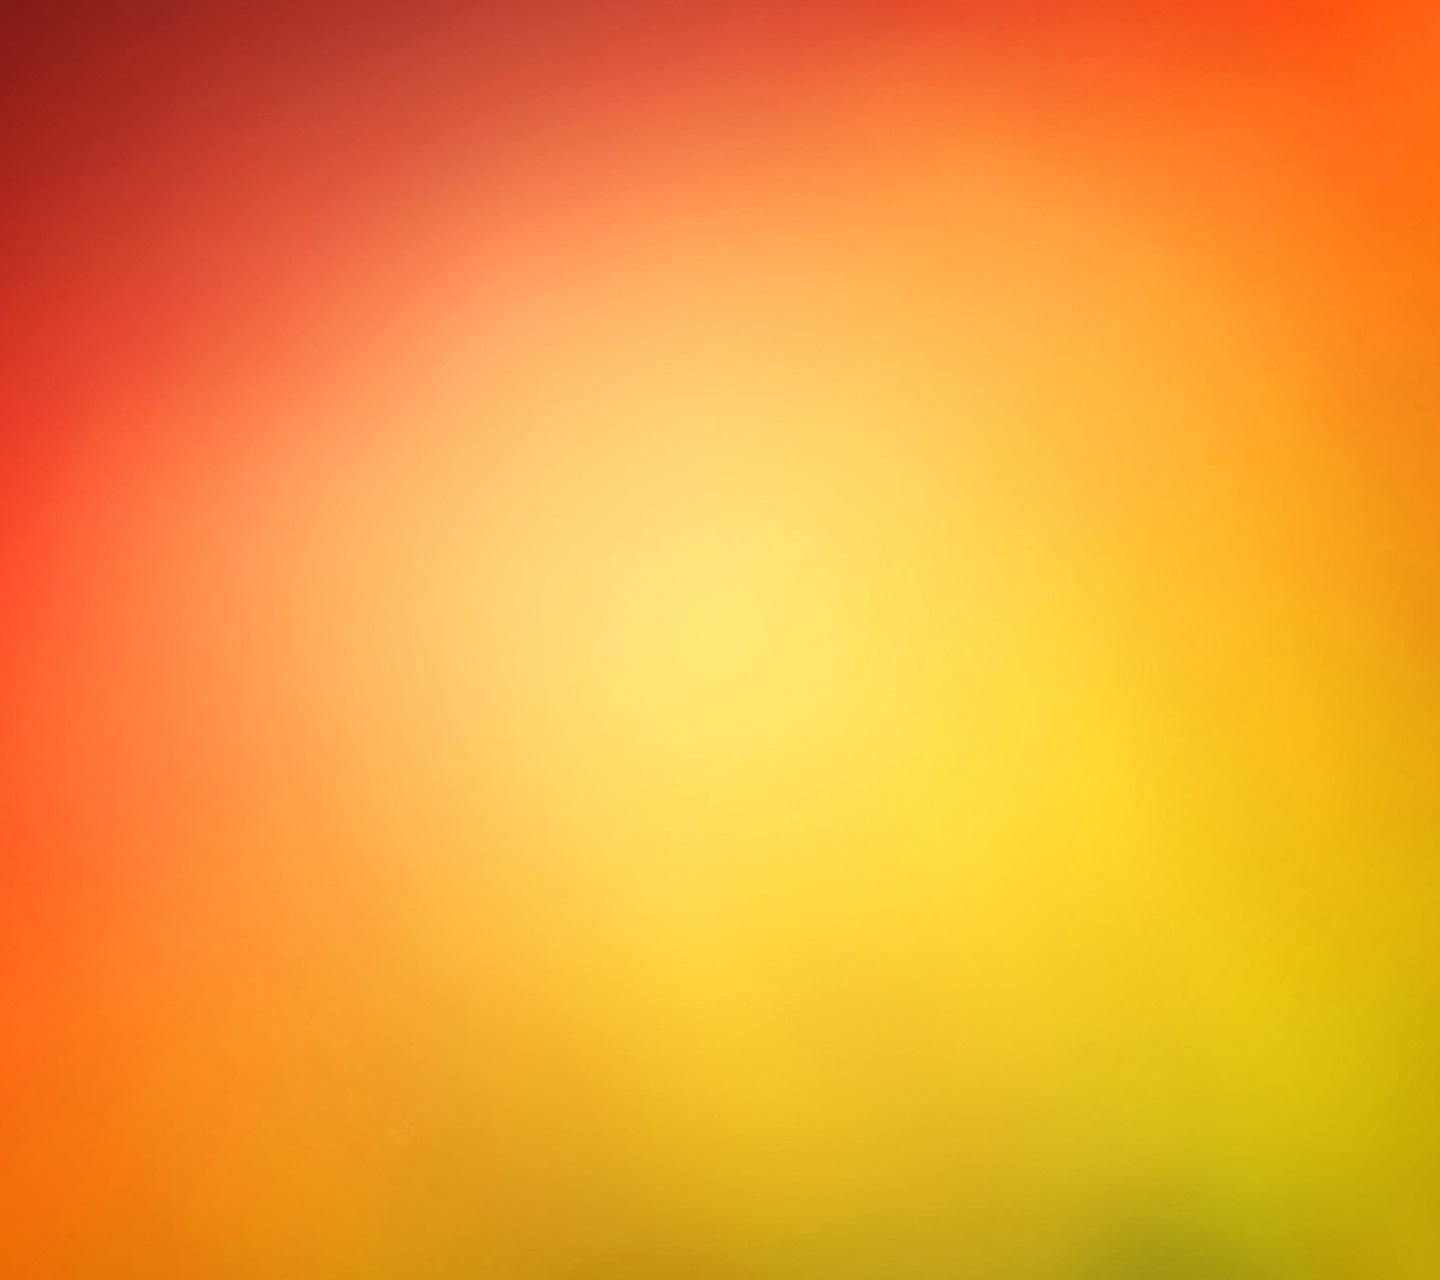 Light Colored Background wallpaper 1440x1280